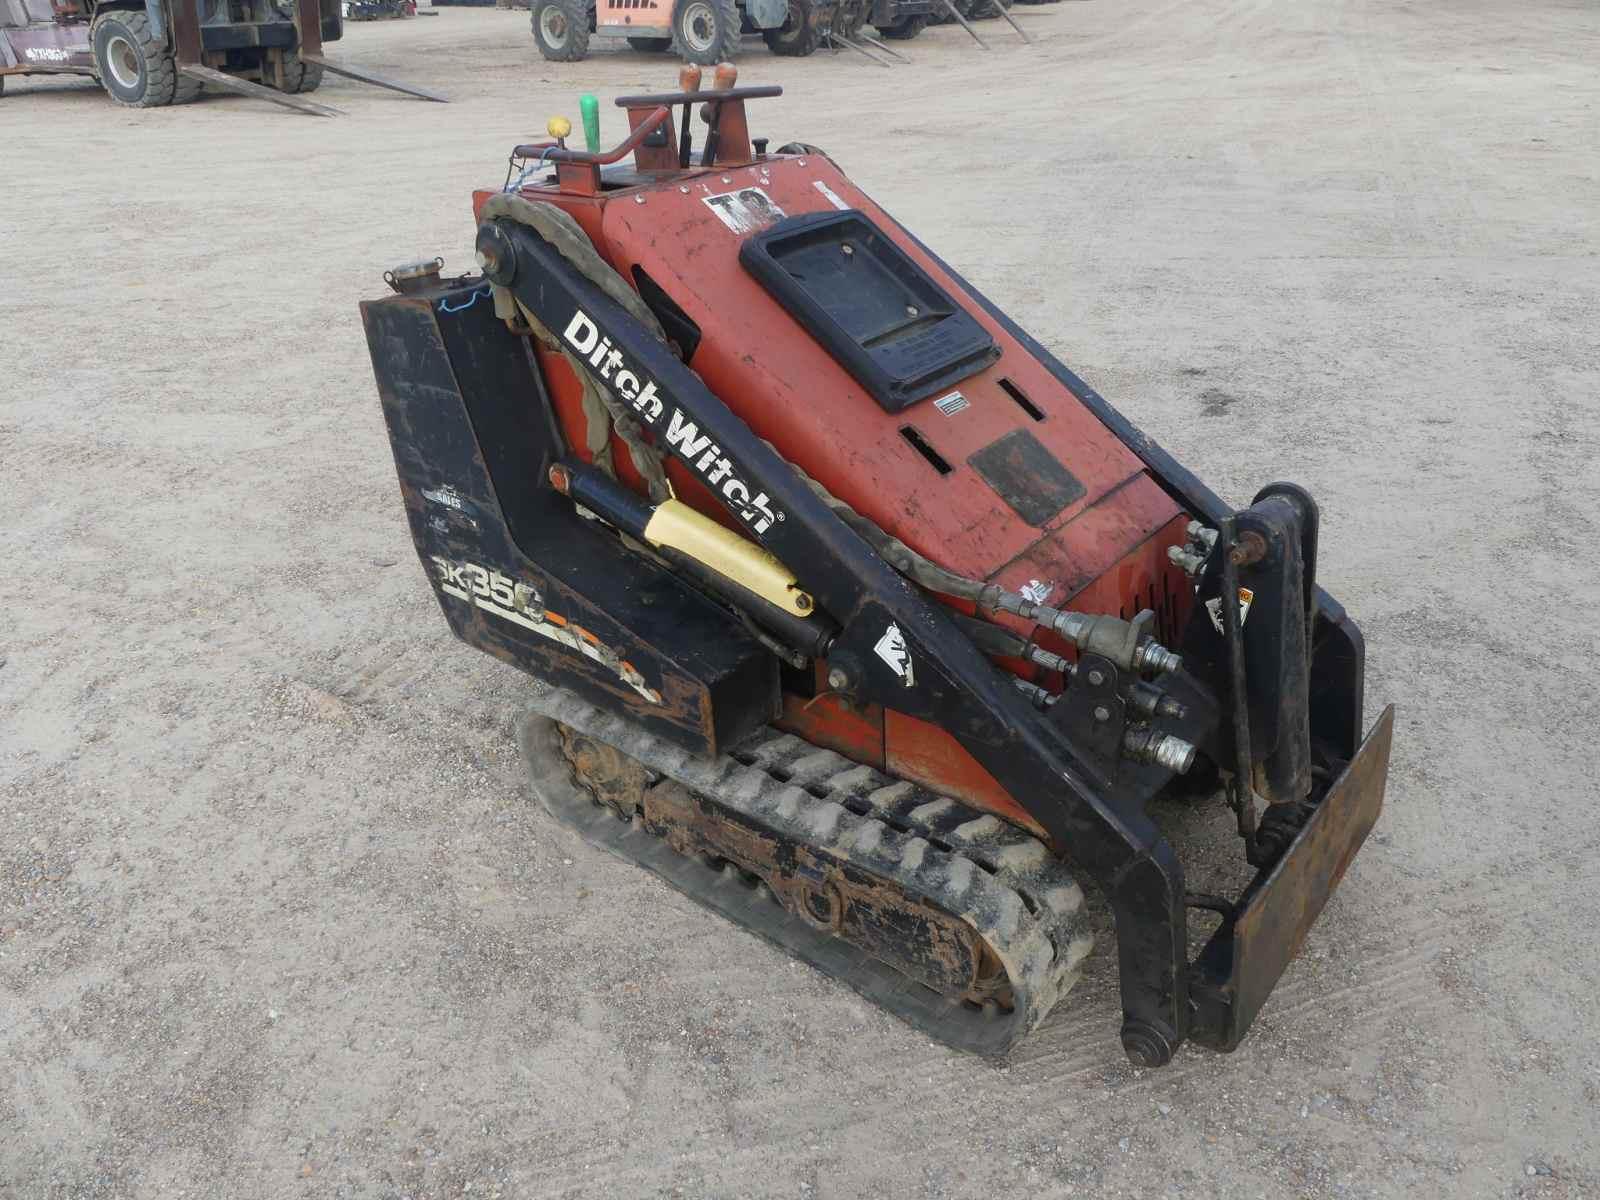 Ditch Witch SK350 Walk-behind Skid Steer, s/n 0000323: Rubber Tracks